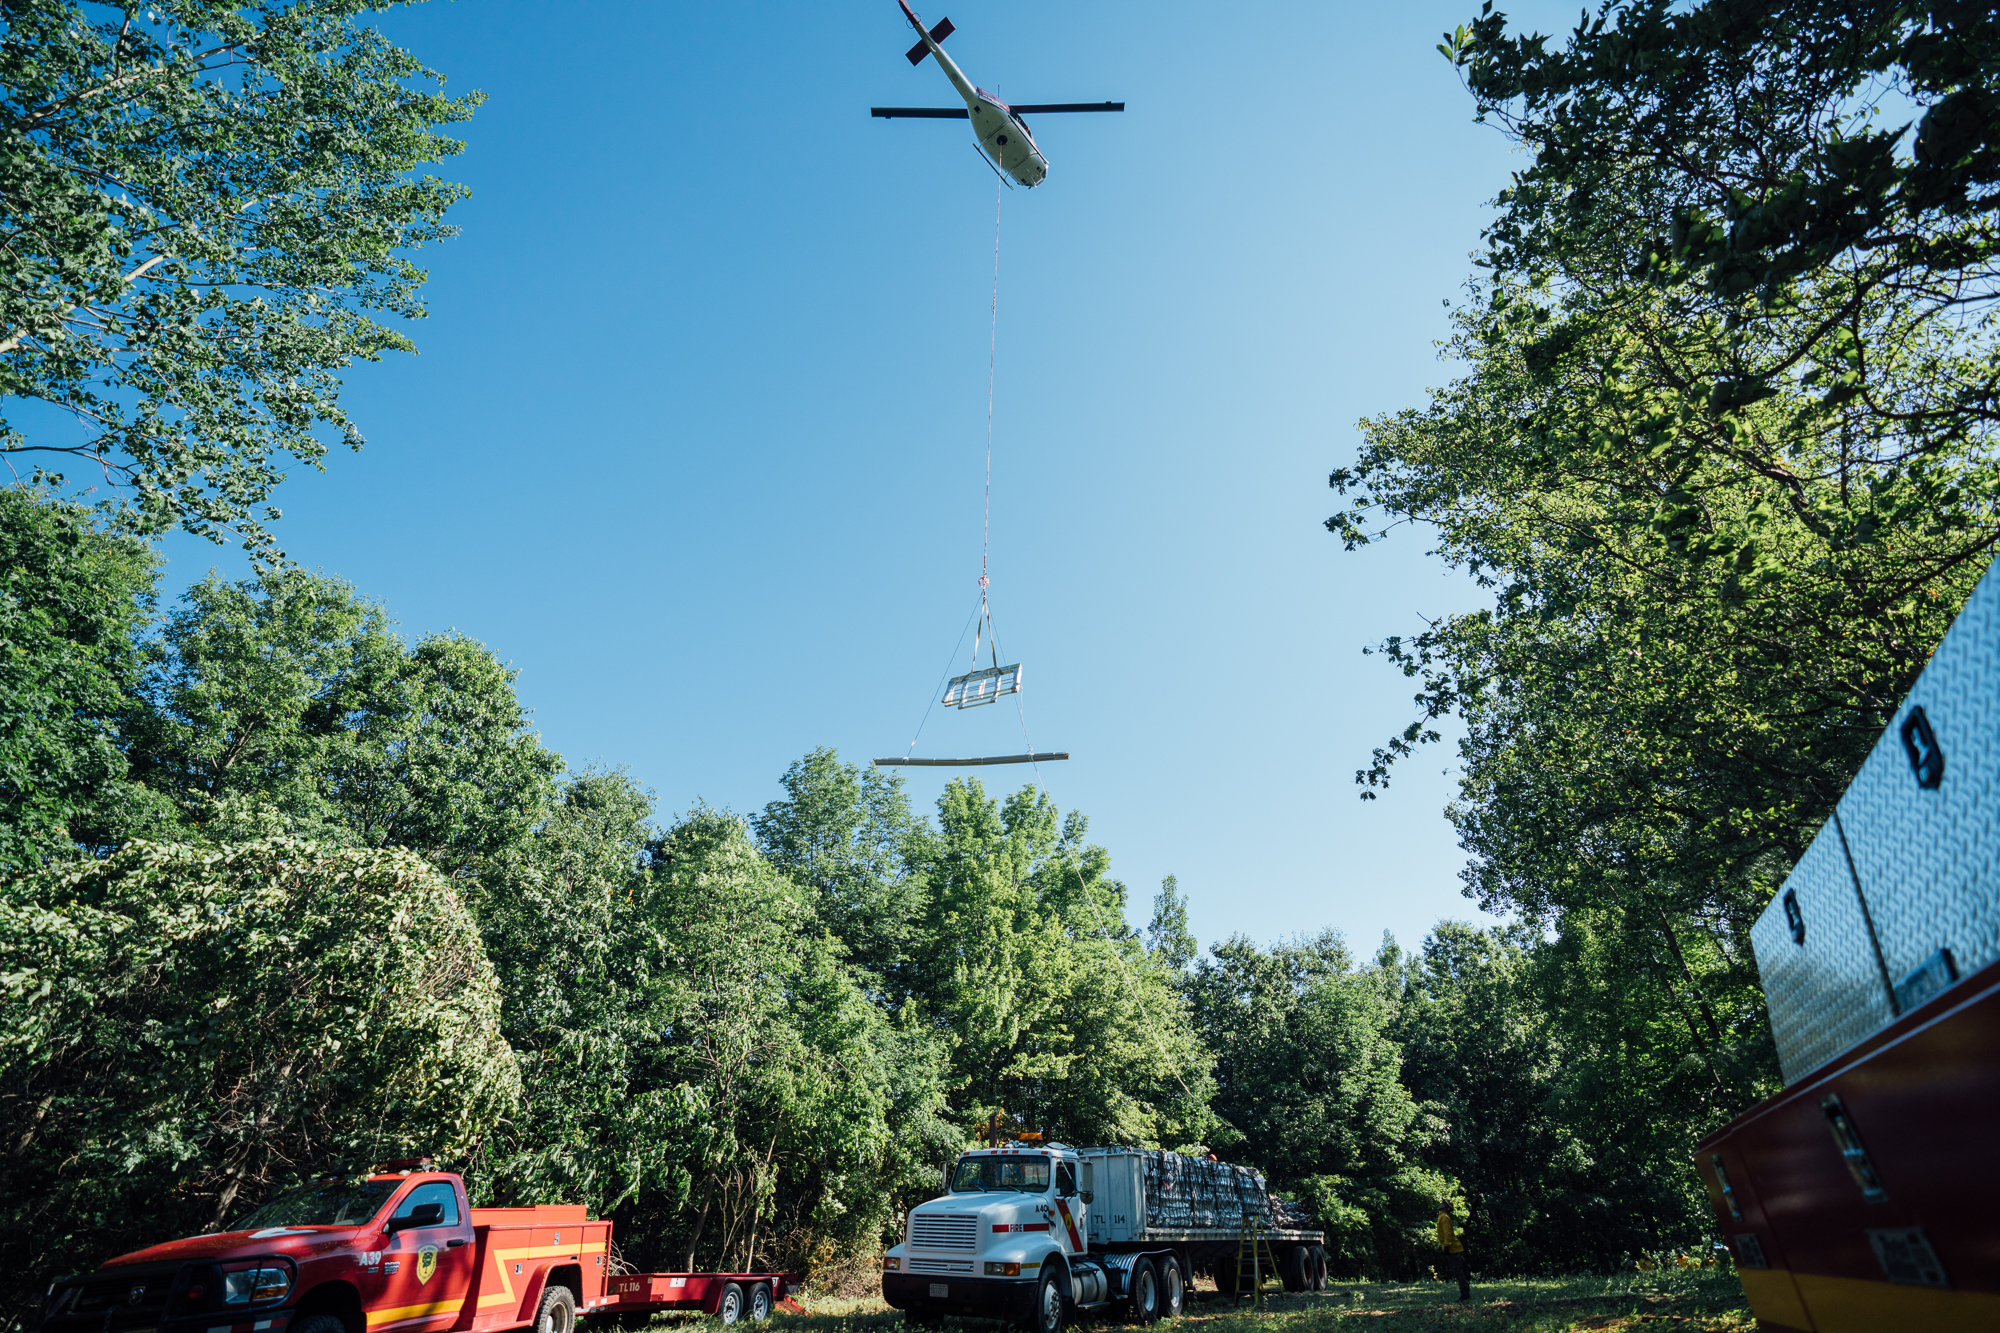 The New Jersey Forest Fire Service delivered the 10 loads of floating walkway materials via helicopter. Photo by Ryan Windess.